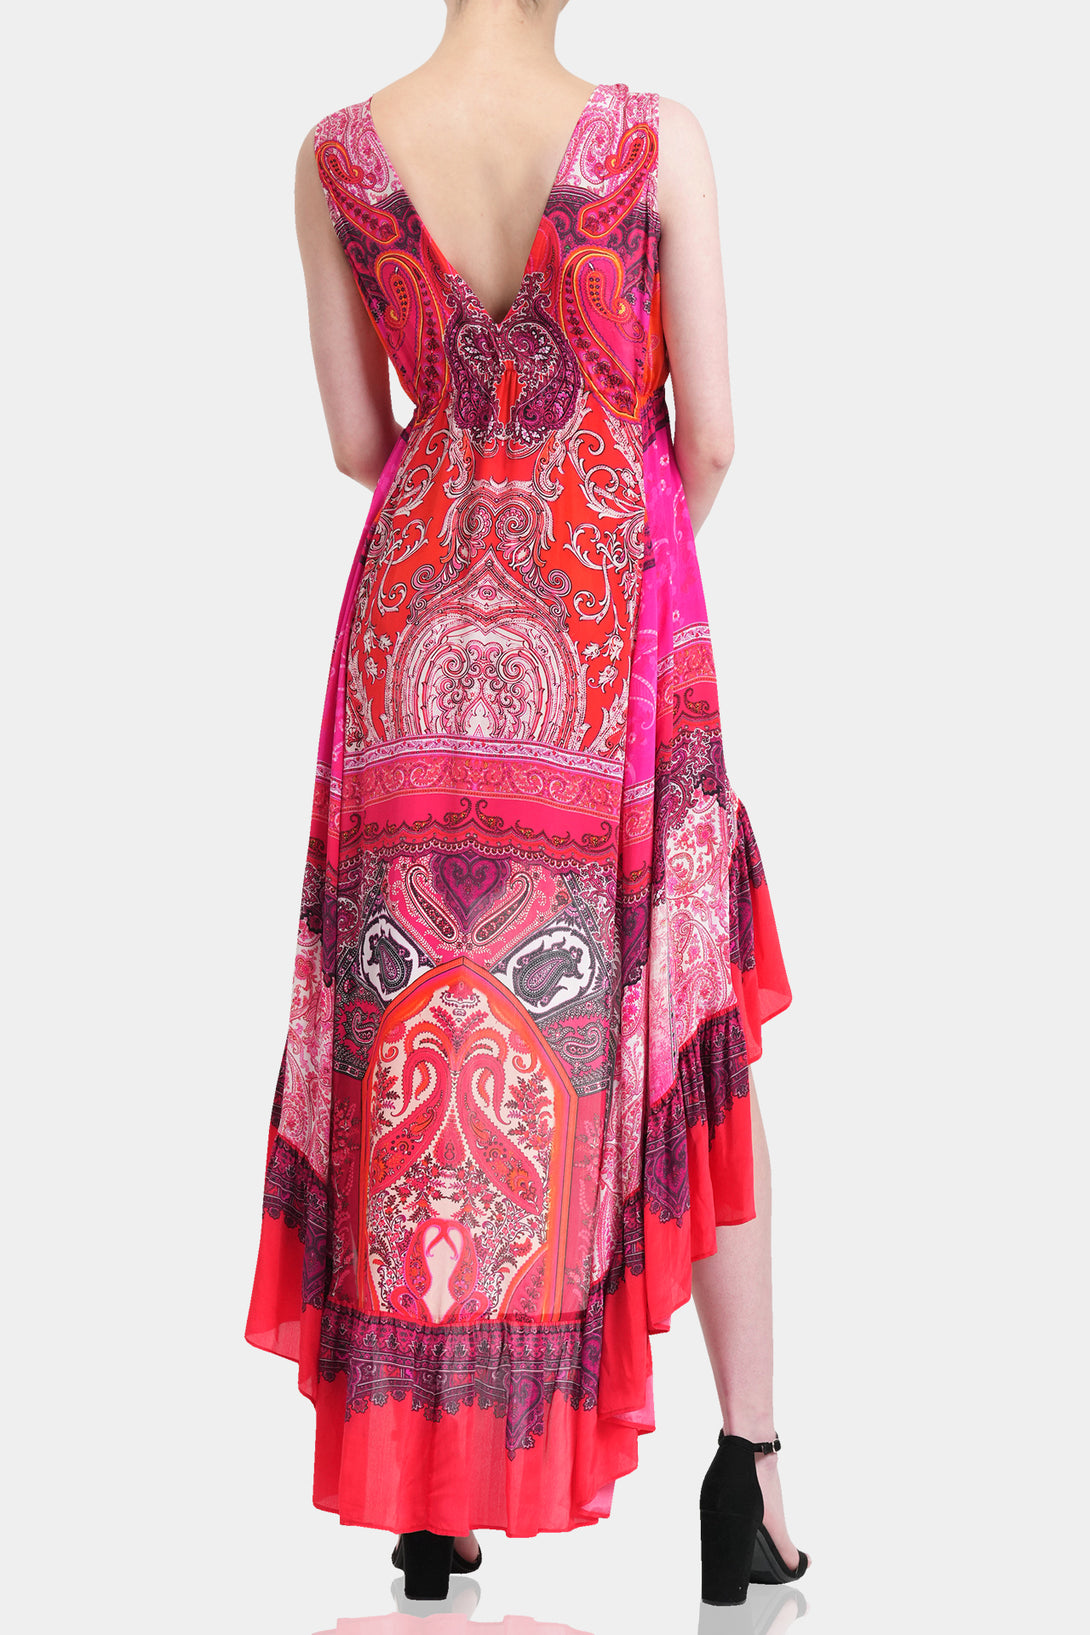  pink maxi dress women, high and low cocktail dresses, plunging v neck formal dress, Shahida Parides,